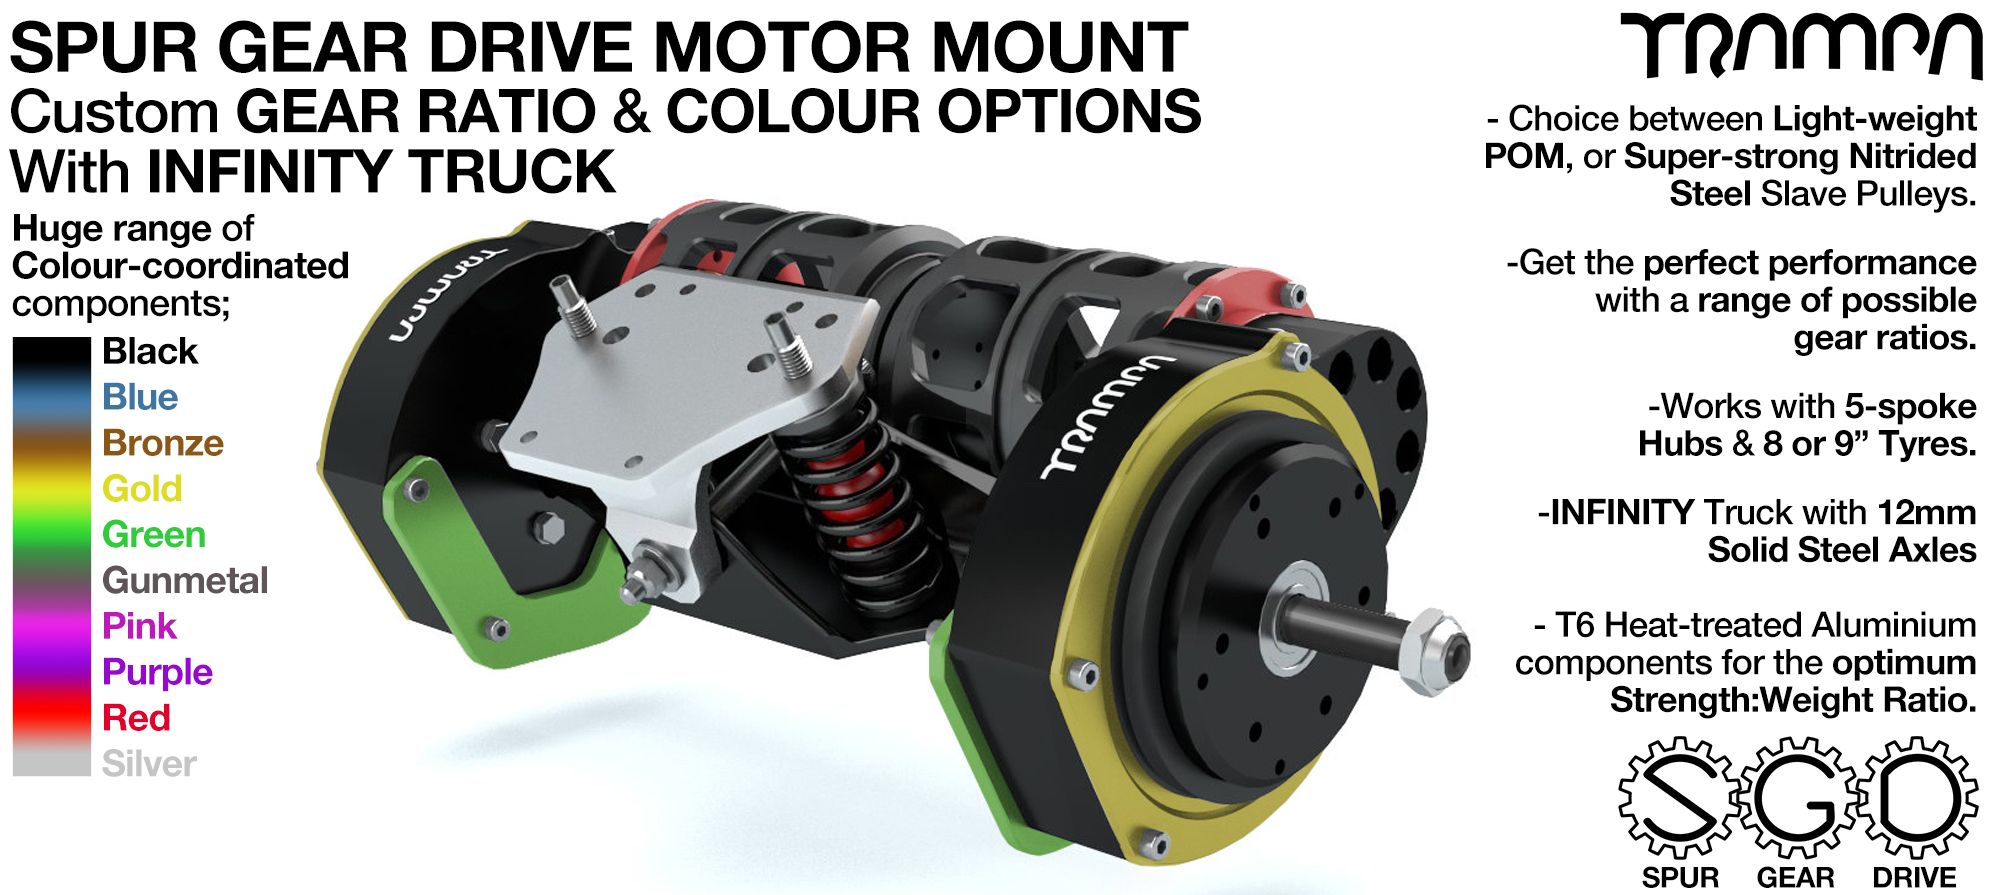 Mountainboard Spur Gear Drive TWIN with PULLEYS & FILTERS Mounted on a INFINITY TRUCK